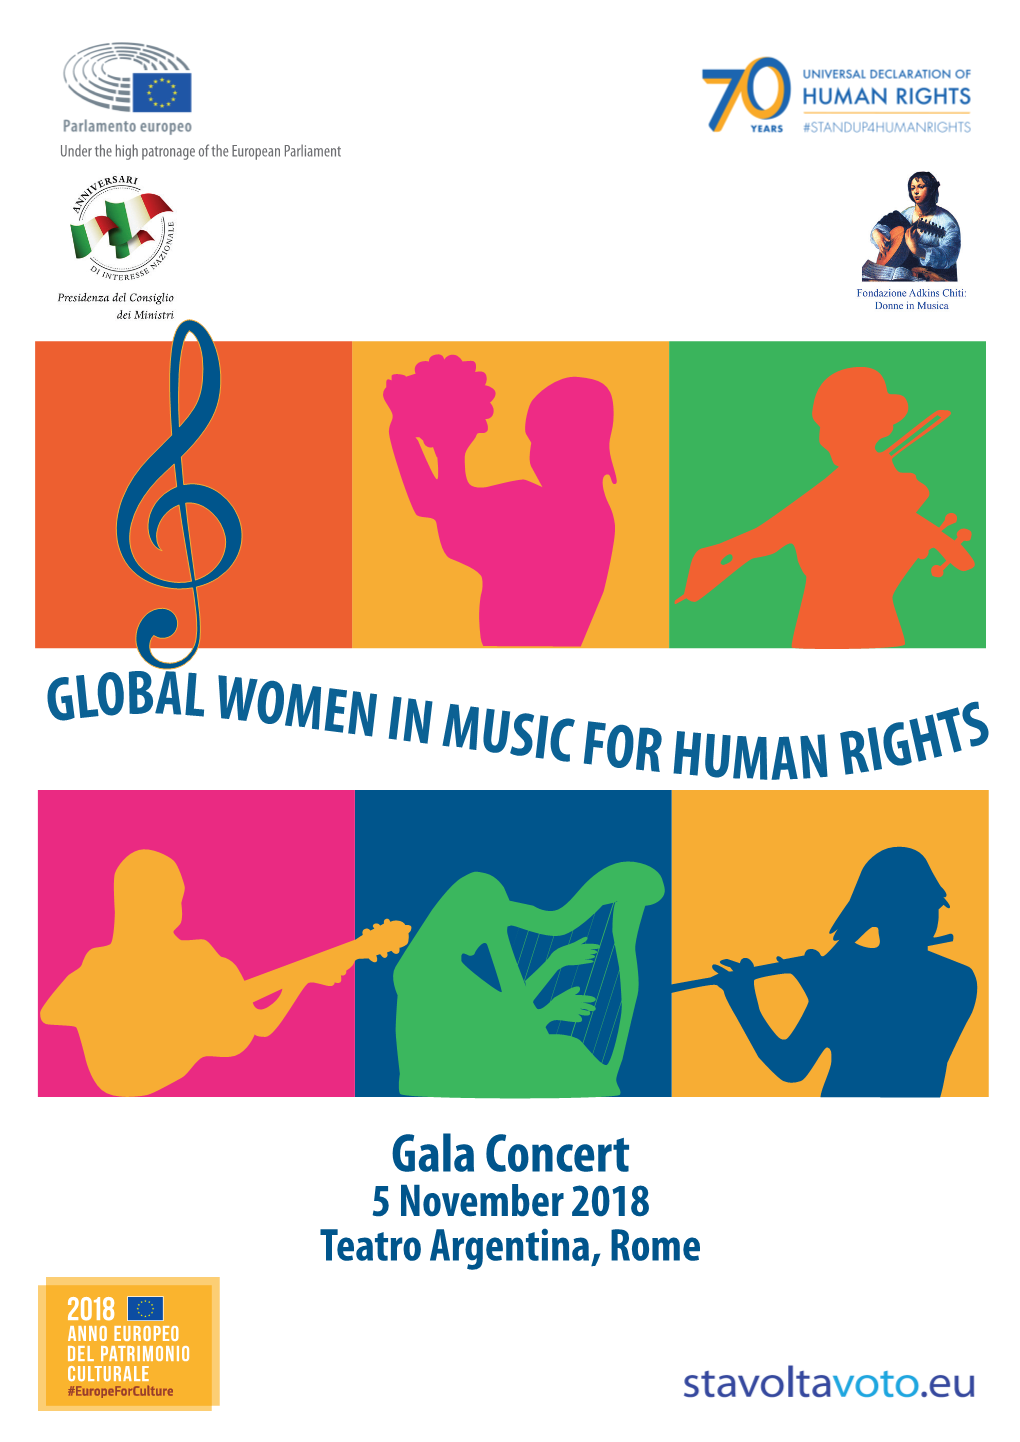 Gala Concert 5 November 2018 Teatro Argentina, Rome the Universal Declaration of Human Rights